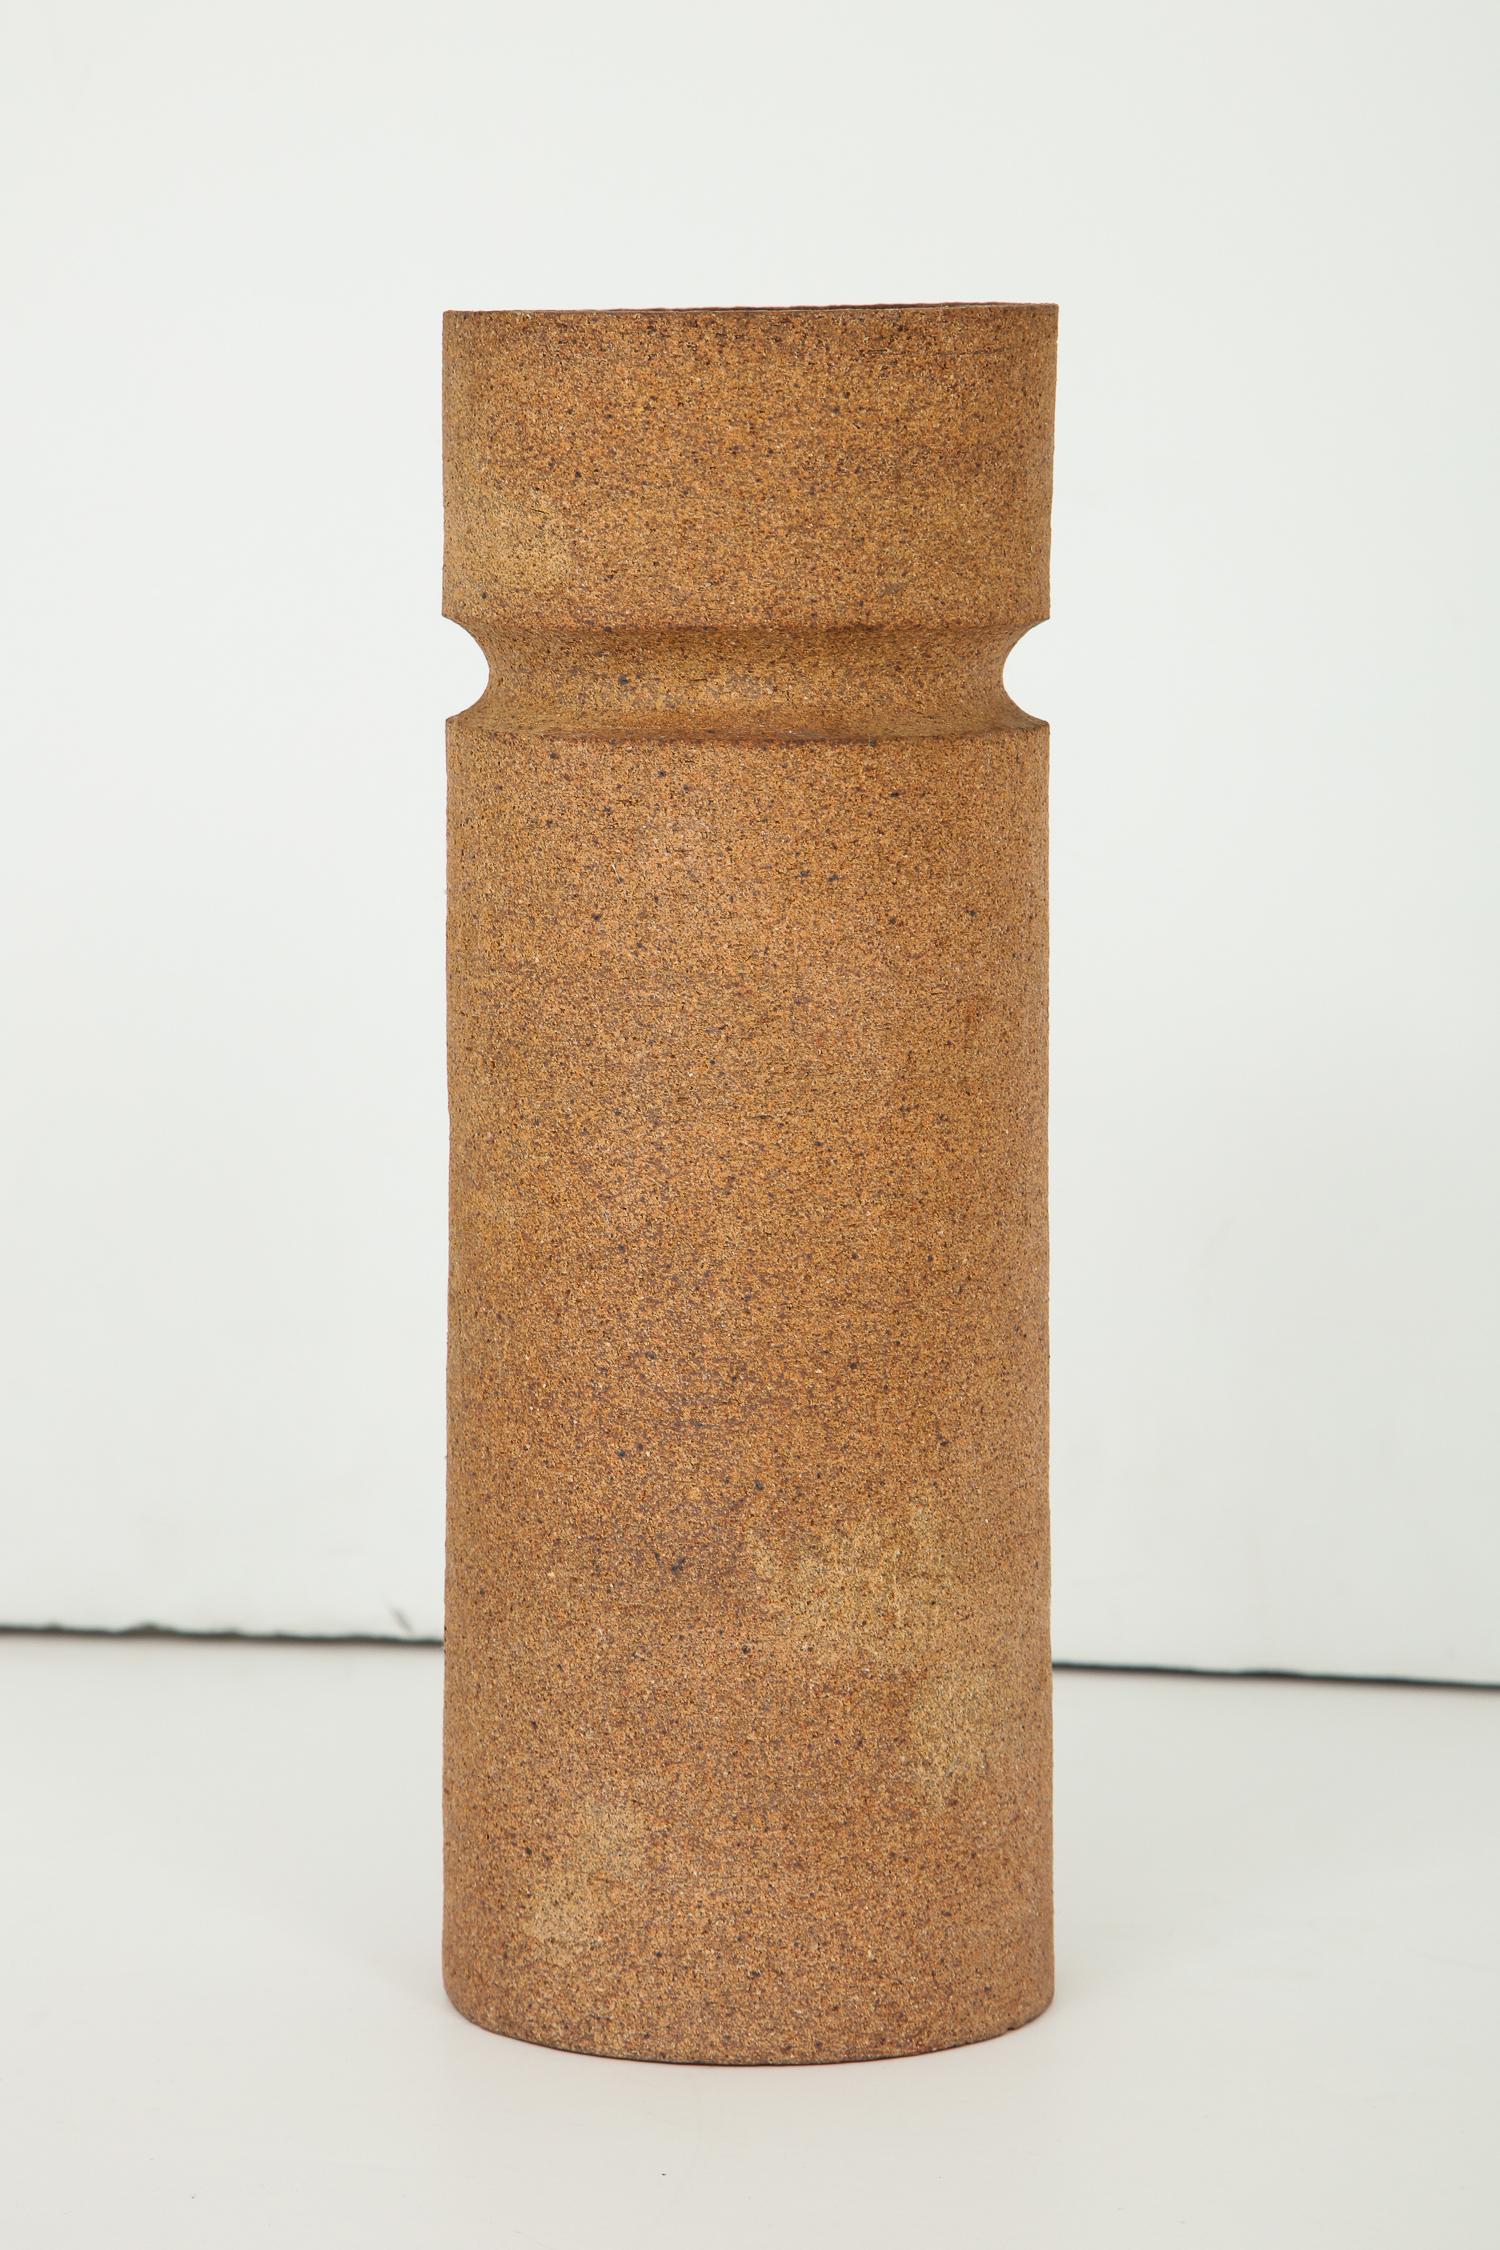 Architectonic cylindrical vessel with incised ledge, unglazed outside, partially glazed inside, by Madrid ceramic artist Antonio Salvador Orodea, principal of the ASO factory. Part of a collection associated with the 1964-1965 World’s Fair in